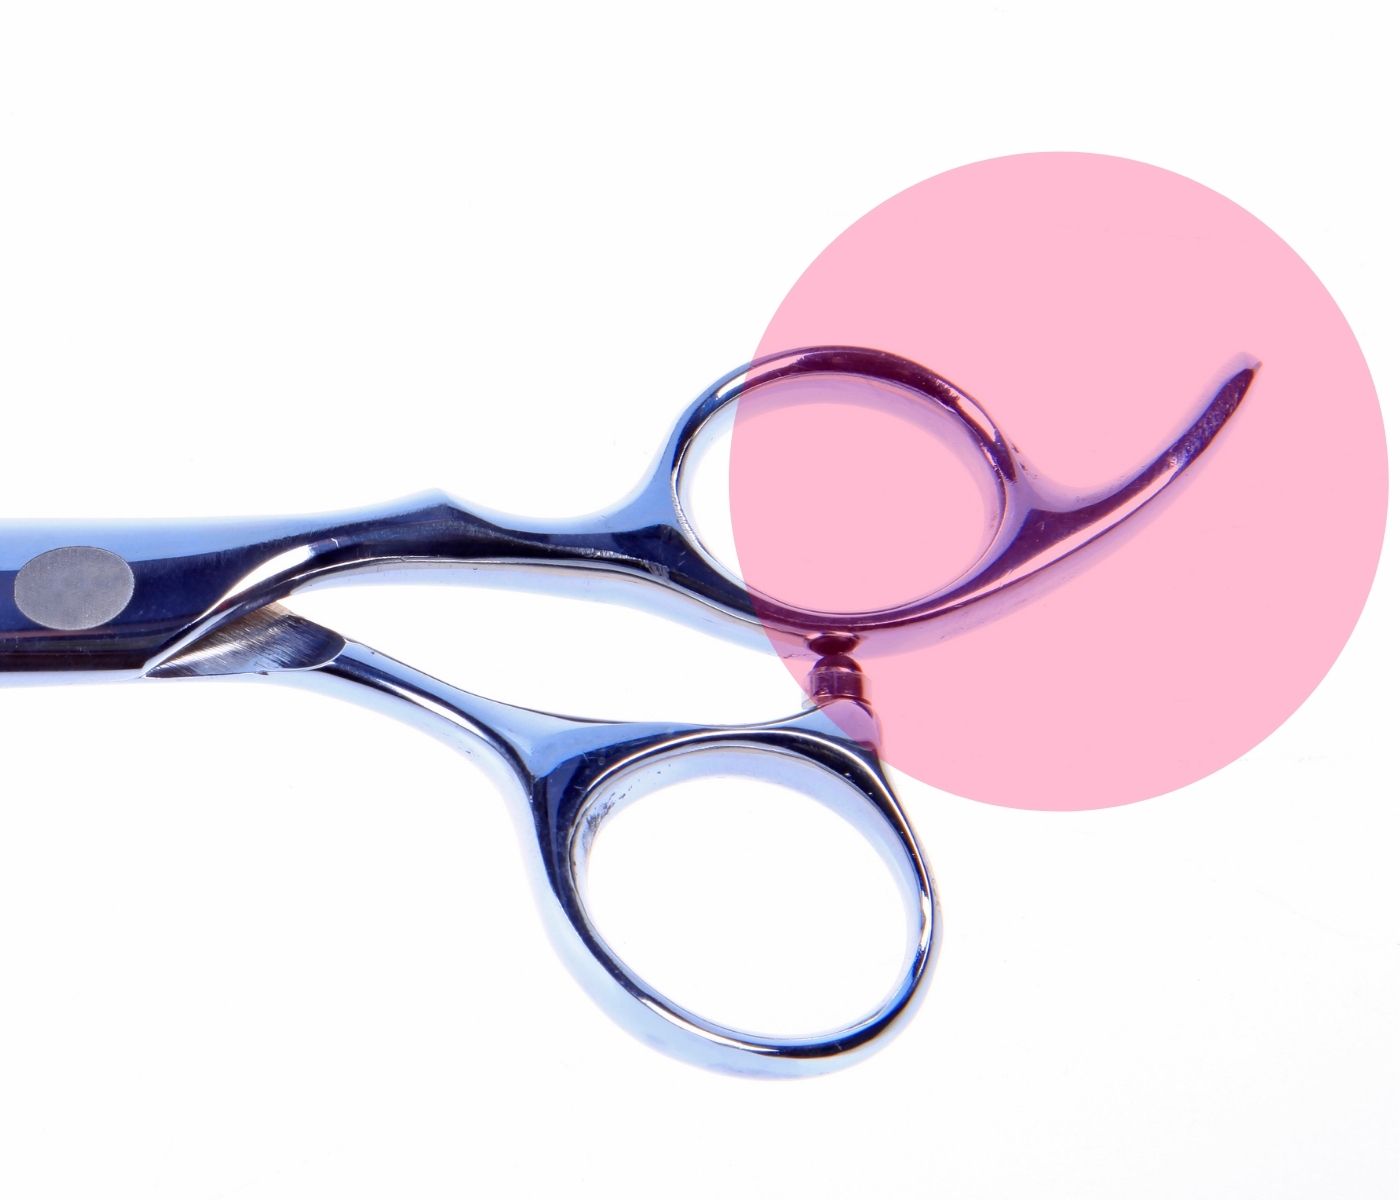 The tang (hook) found on the handle of your hairdressing scissors